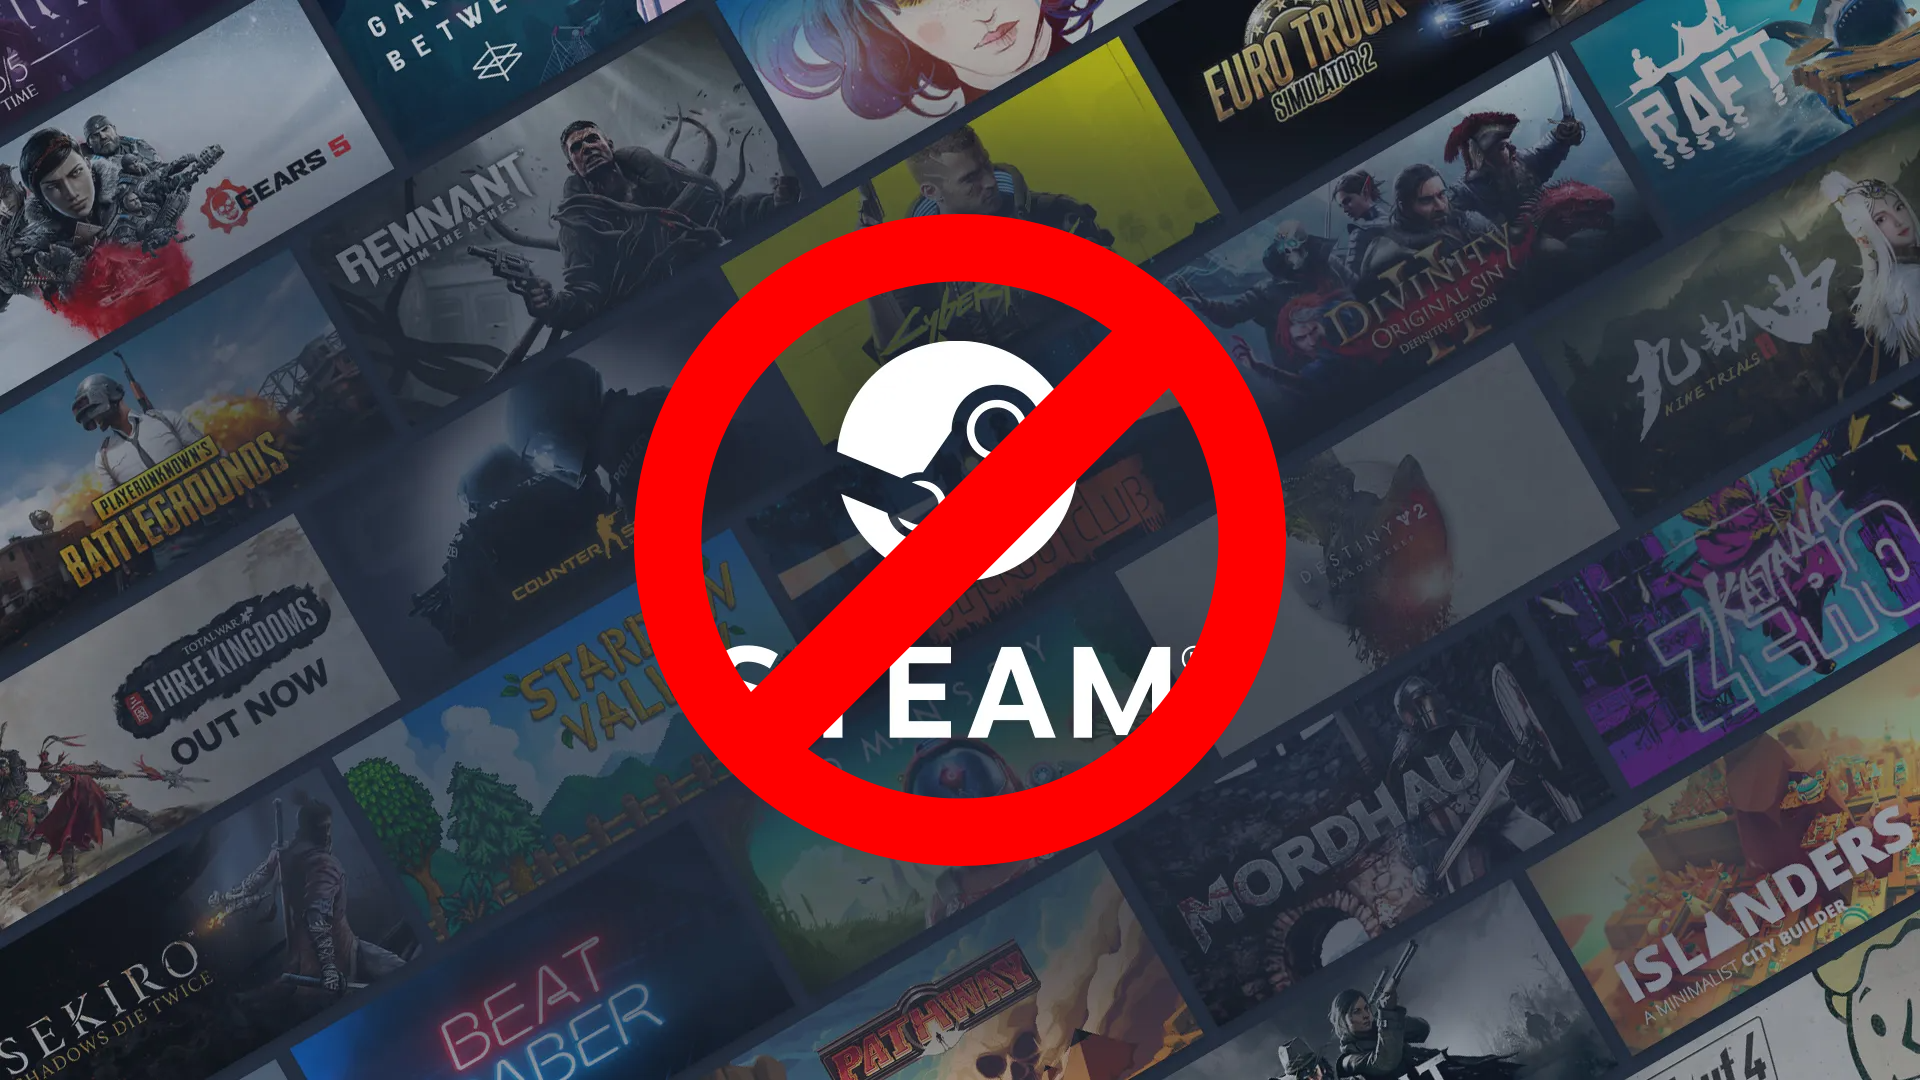 Steam Now Banned in Vietnam: What's the Reason?